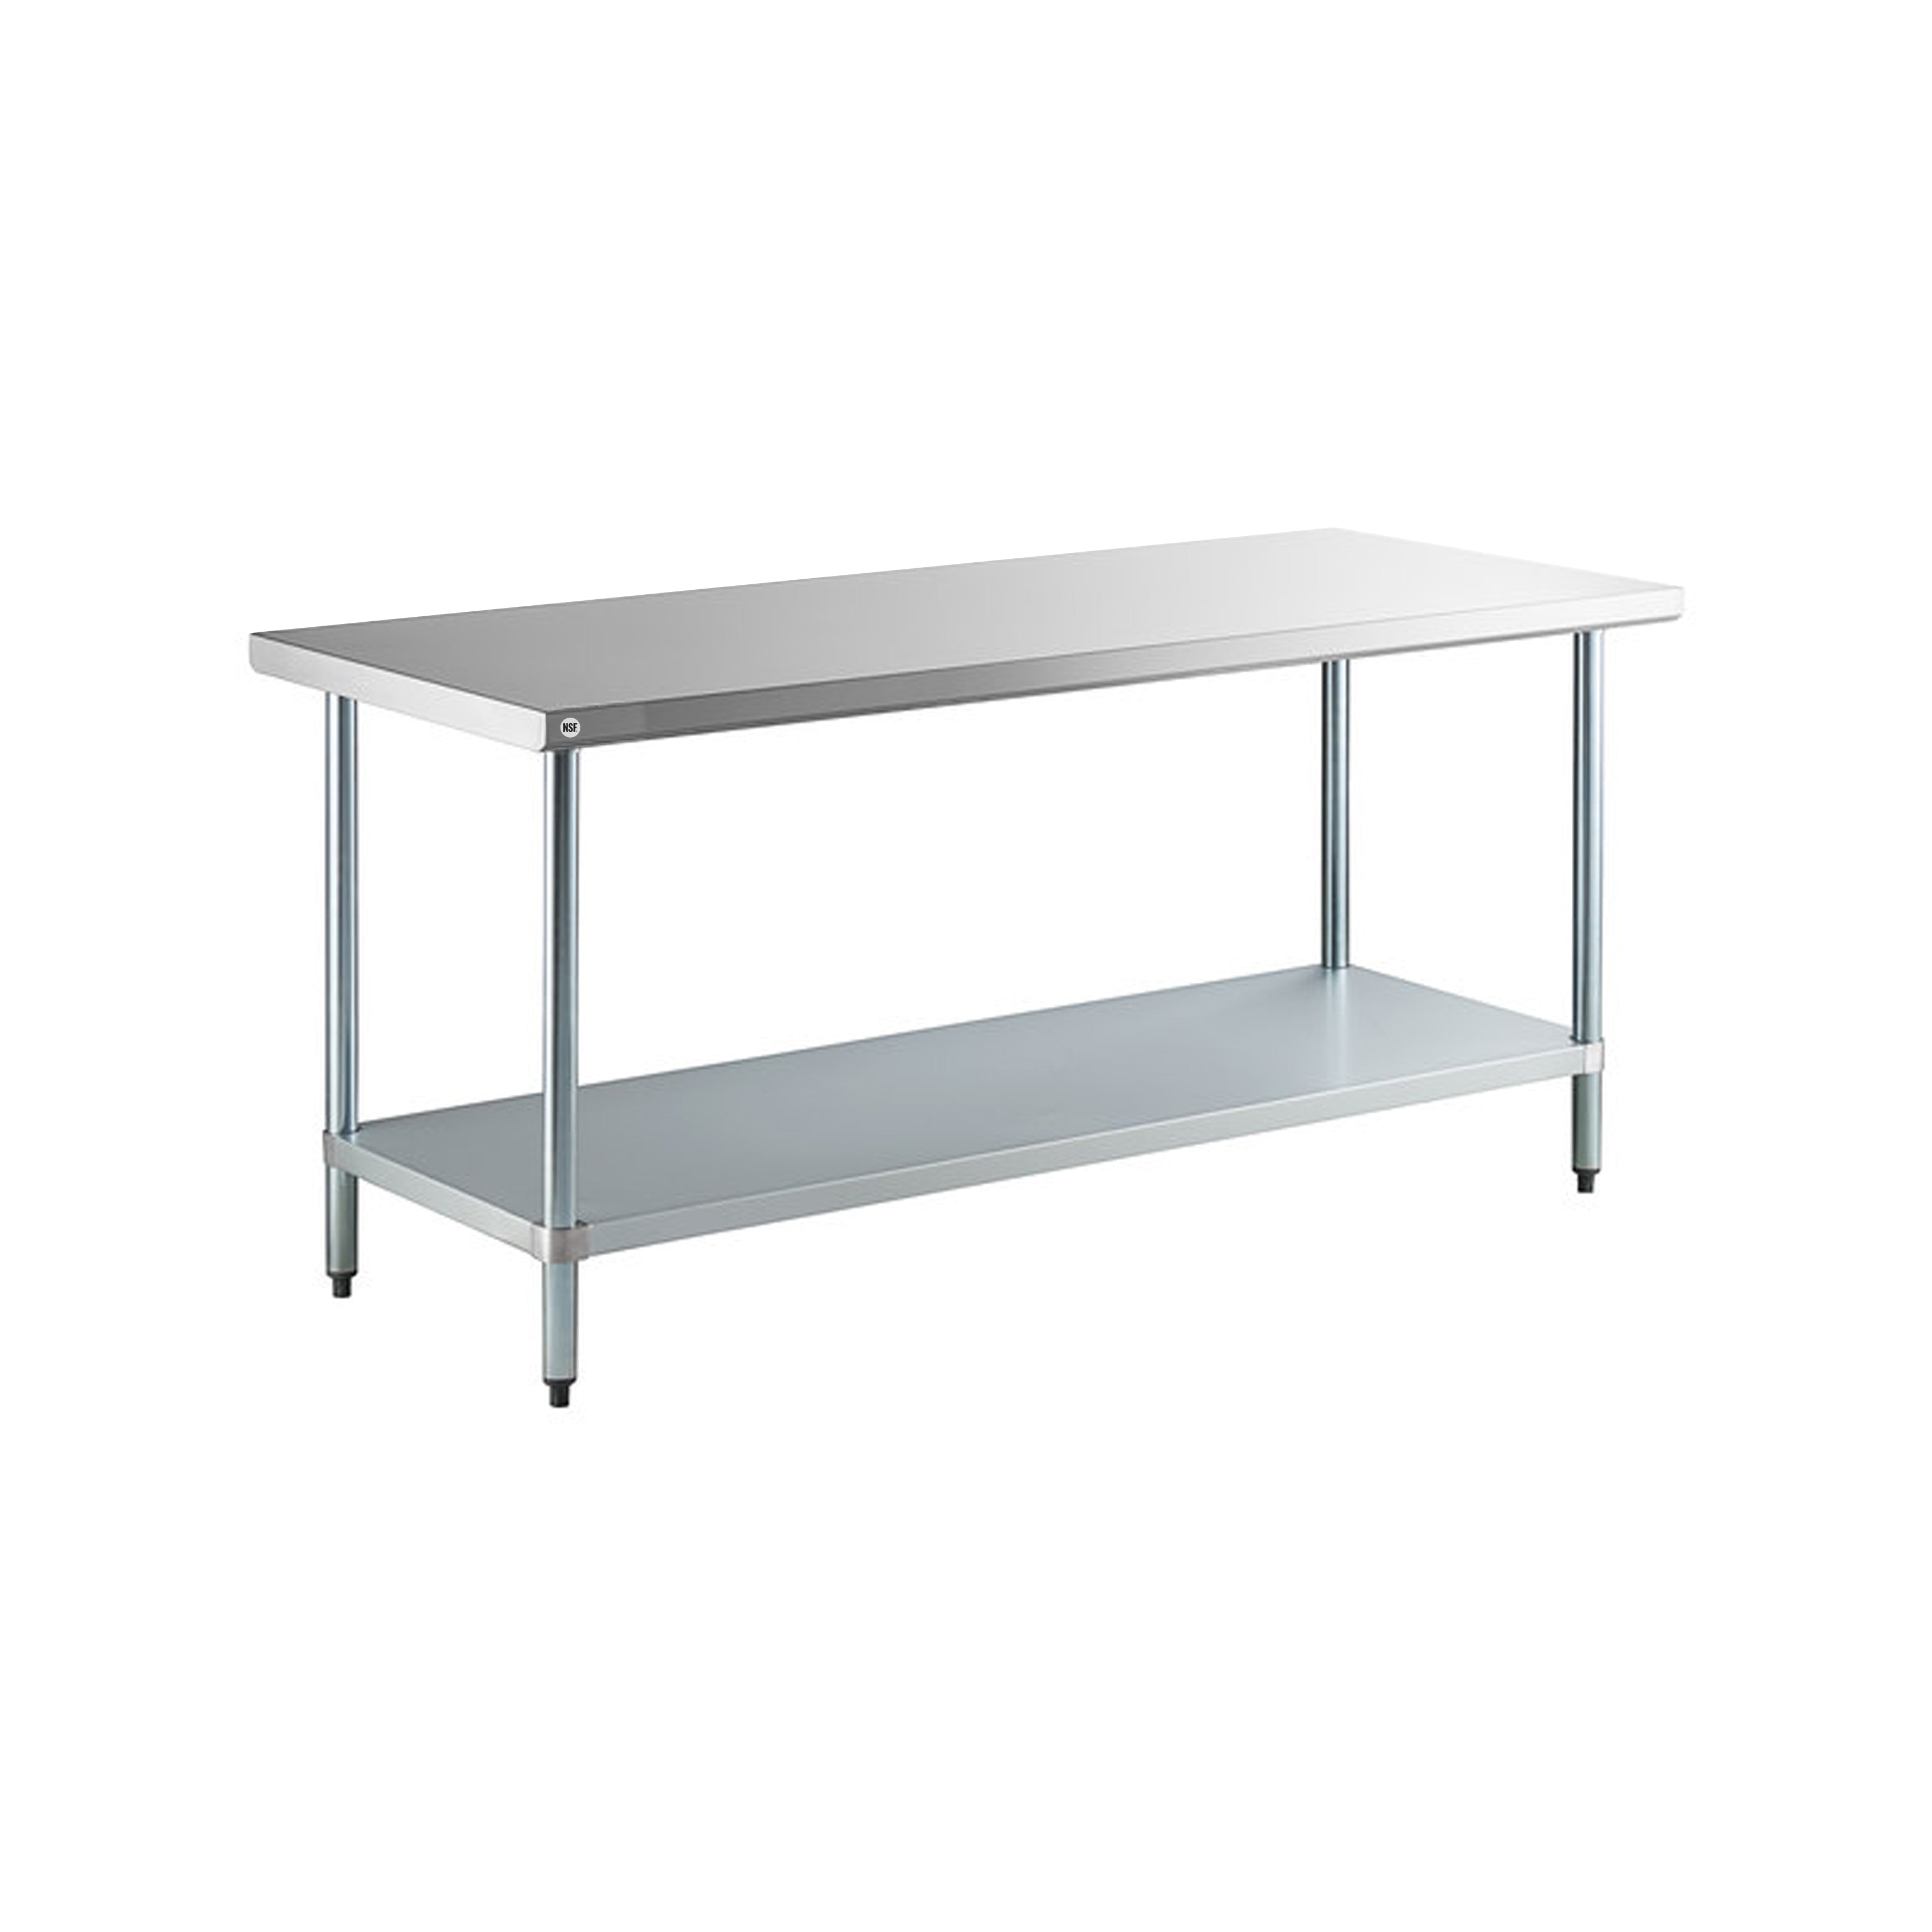 Omcan - 22070, Commercial 24" x 96" Stainless Steel Kitchen Work Table 1600lbs Light Duty